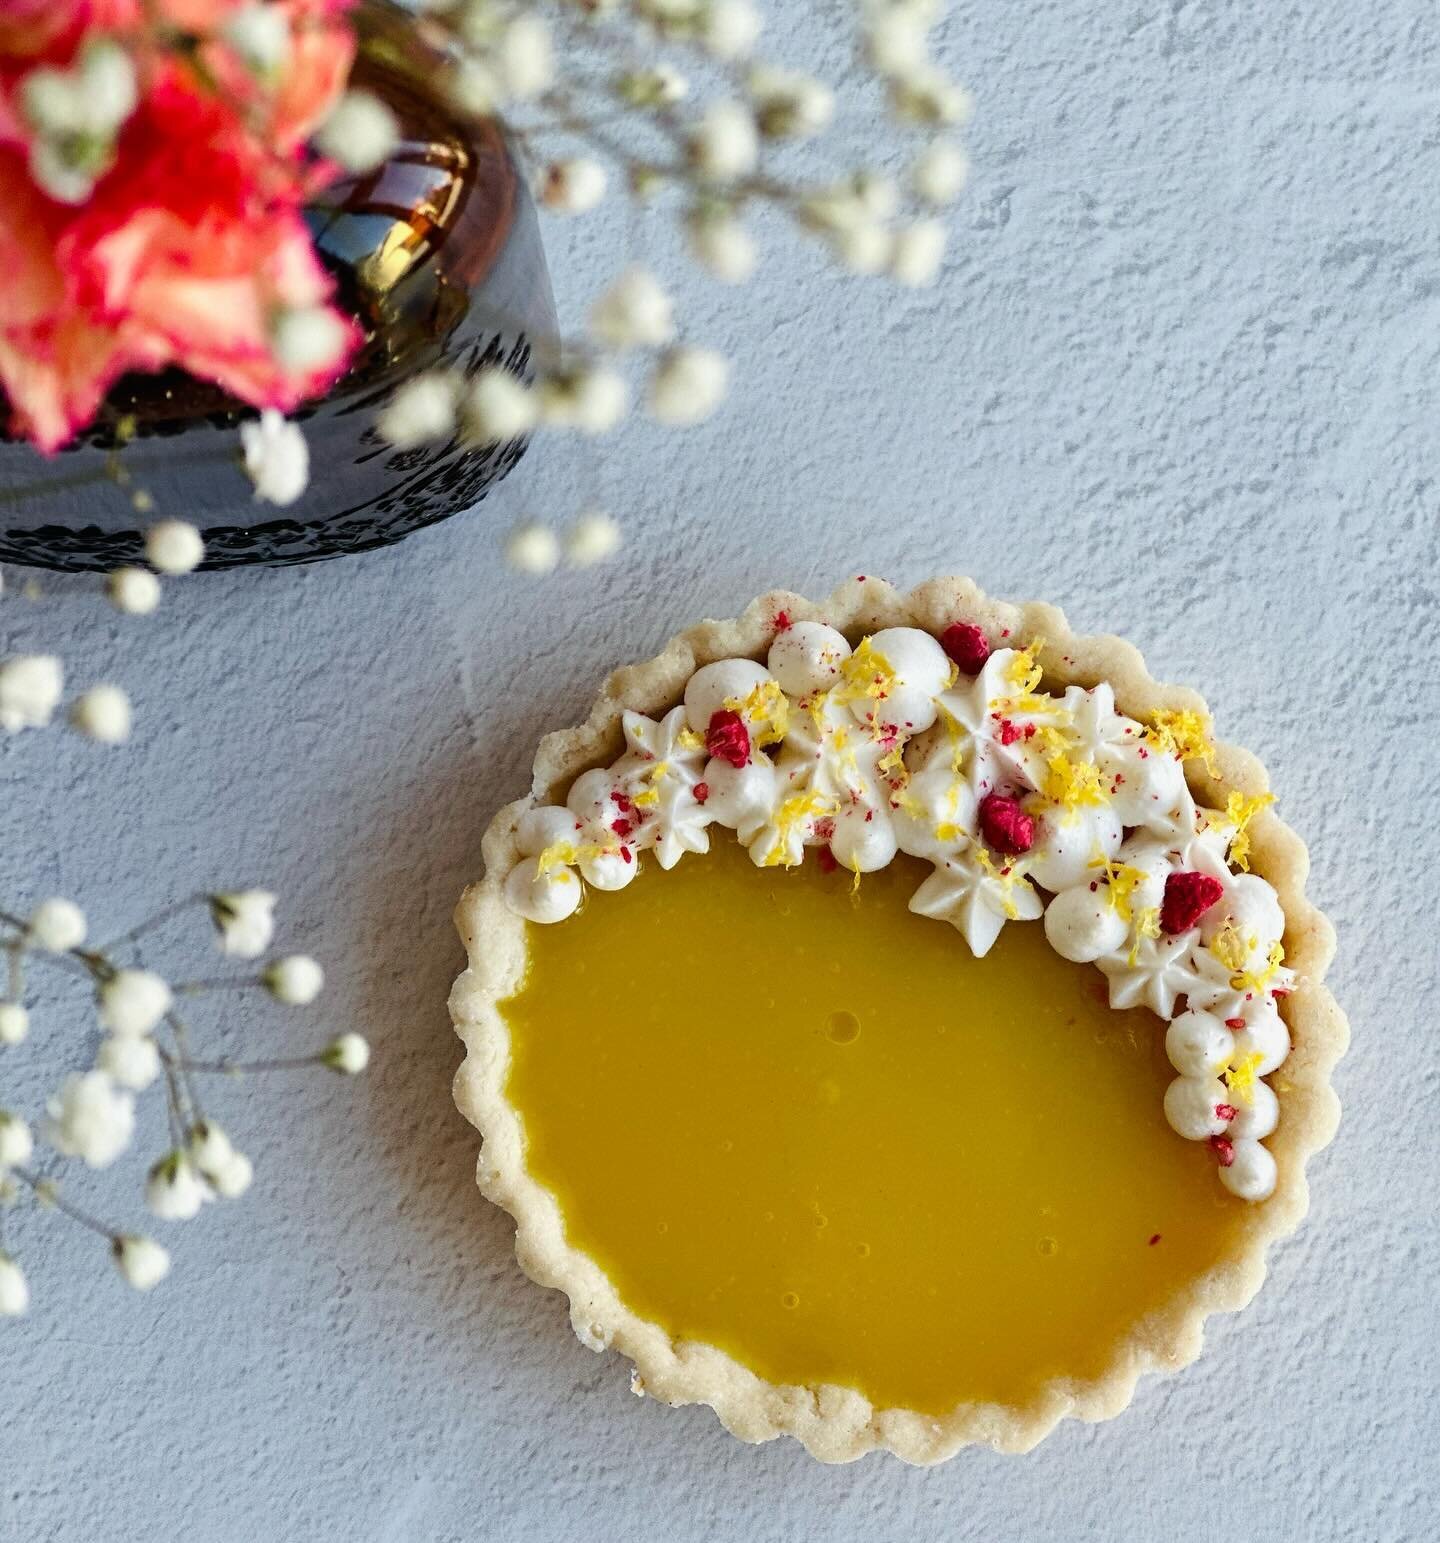 L E M O N  T A R T 

Our new lemon tarts sure went over well this week! We already sold out once, but don&rsquo;t worry! We made a fresh batch last night 🍋 

Our flaky pie crust baked to perfection, filled with our housemade lemon curd, topped with 